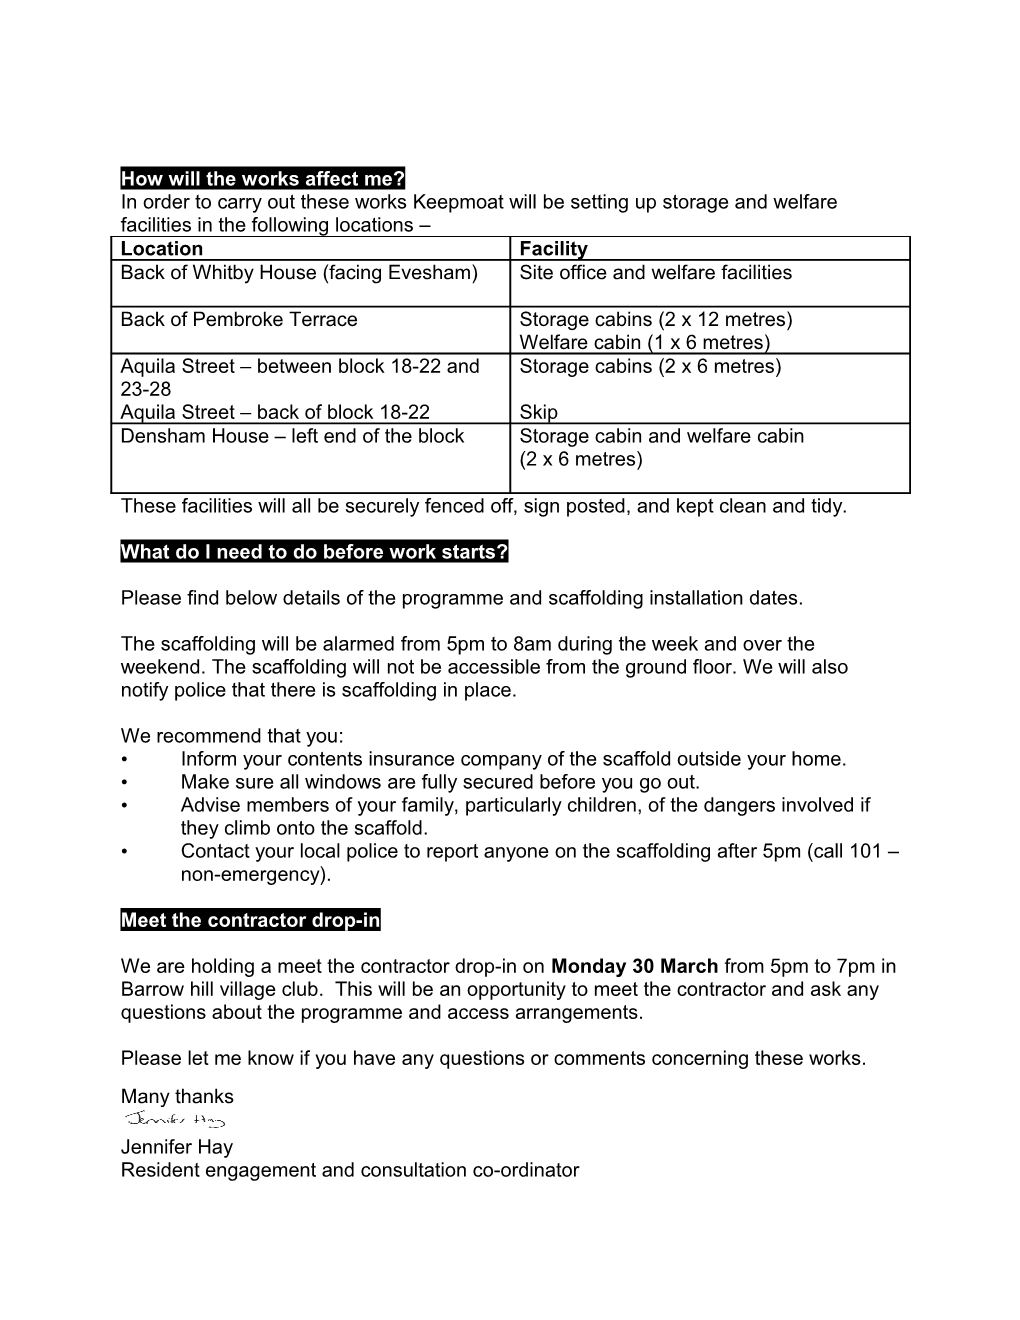 Re: Planned Refurbishment Works (Contract S161)